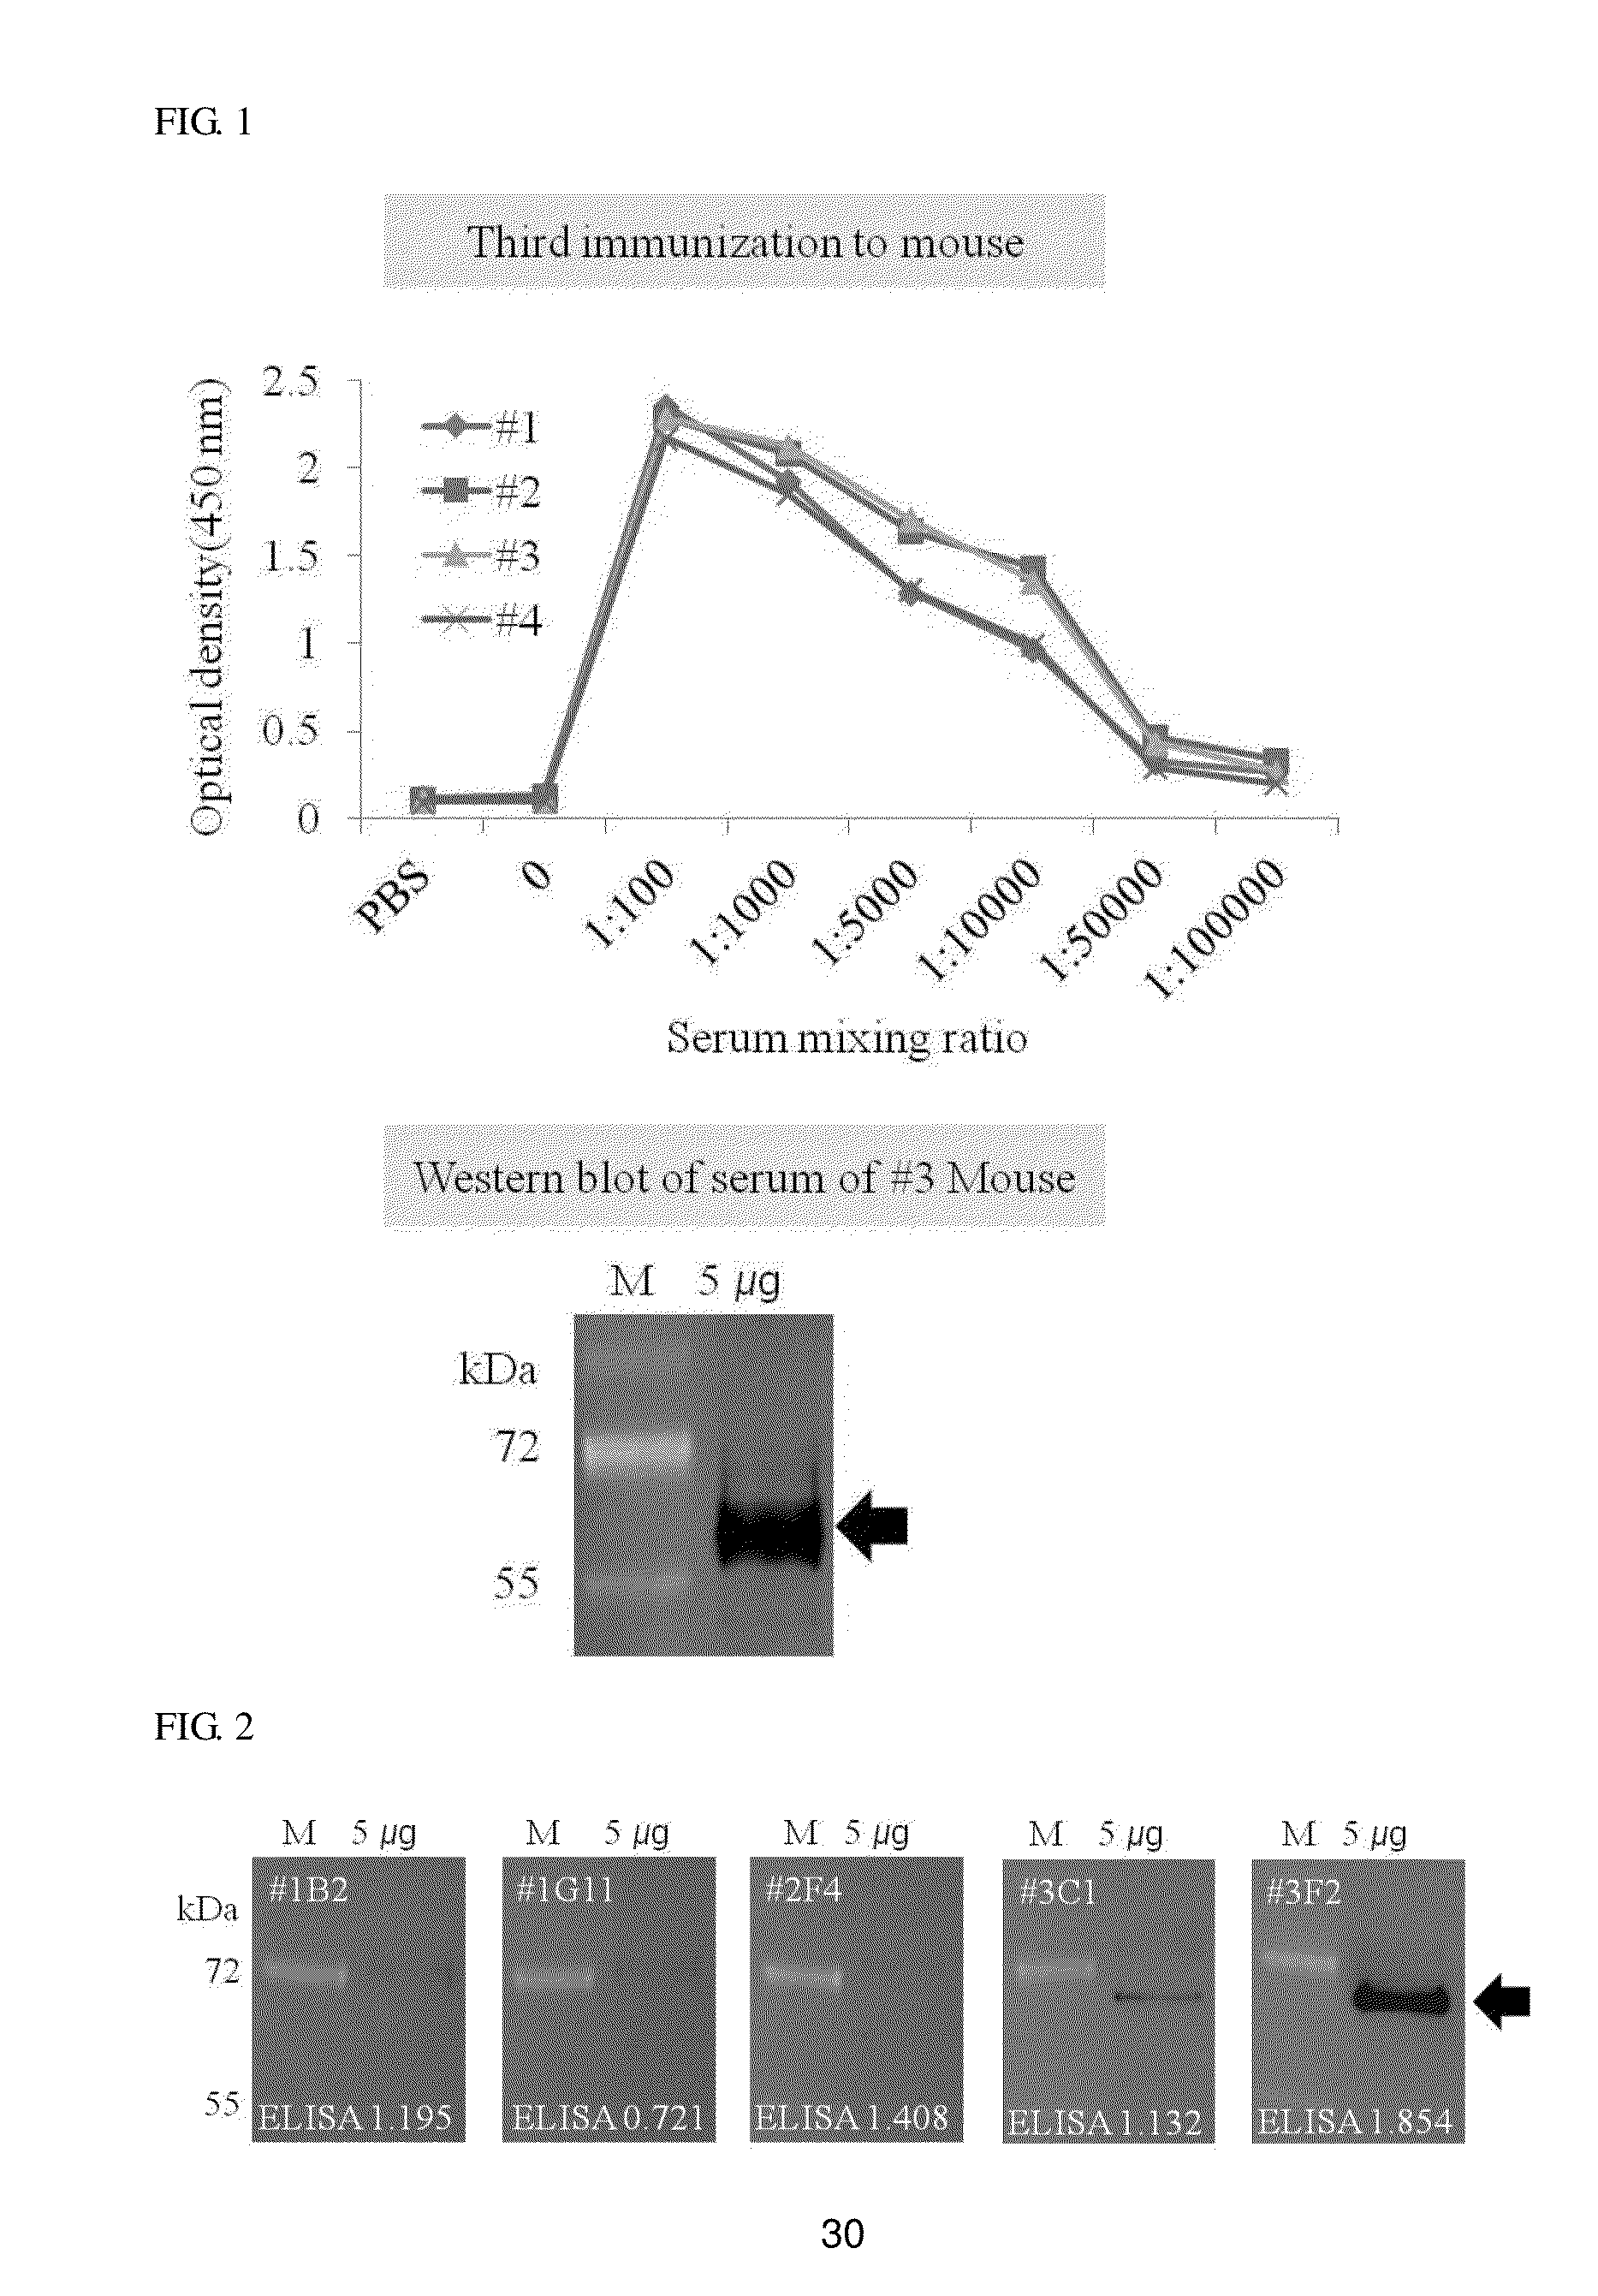 Monoclonal Antibodies which Specifically Recognize Human Liver-Carboxylesterase 1, Hybridoma Cell Lines which Produce Monoclonal Antibodies, and Uses Thereof